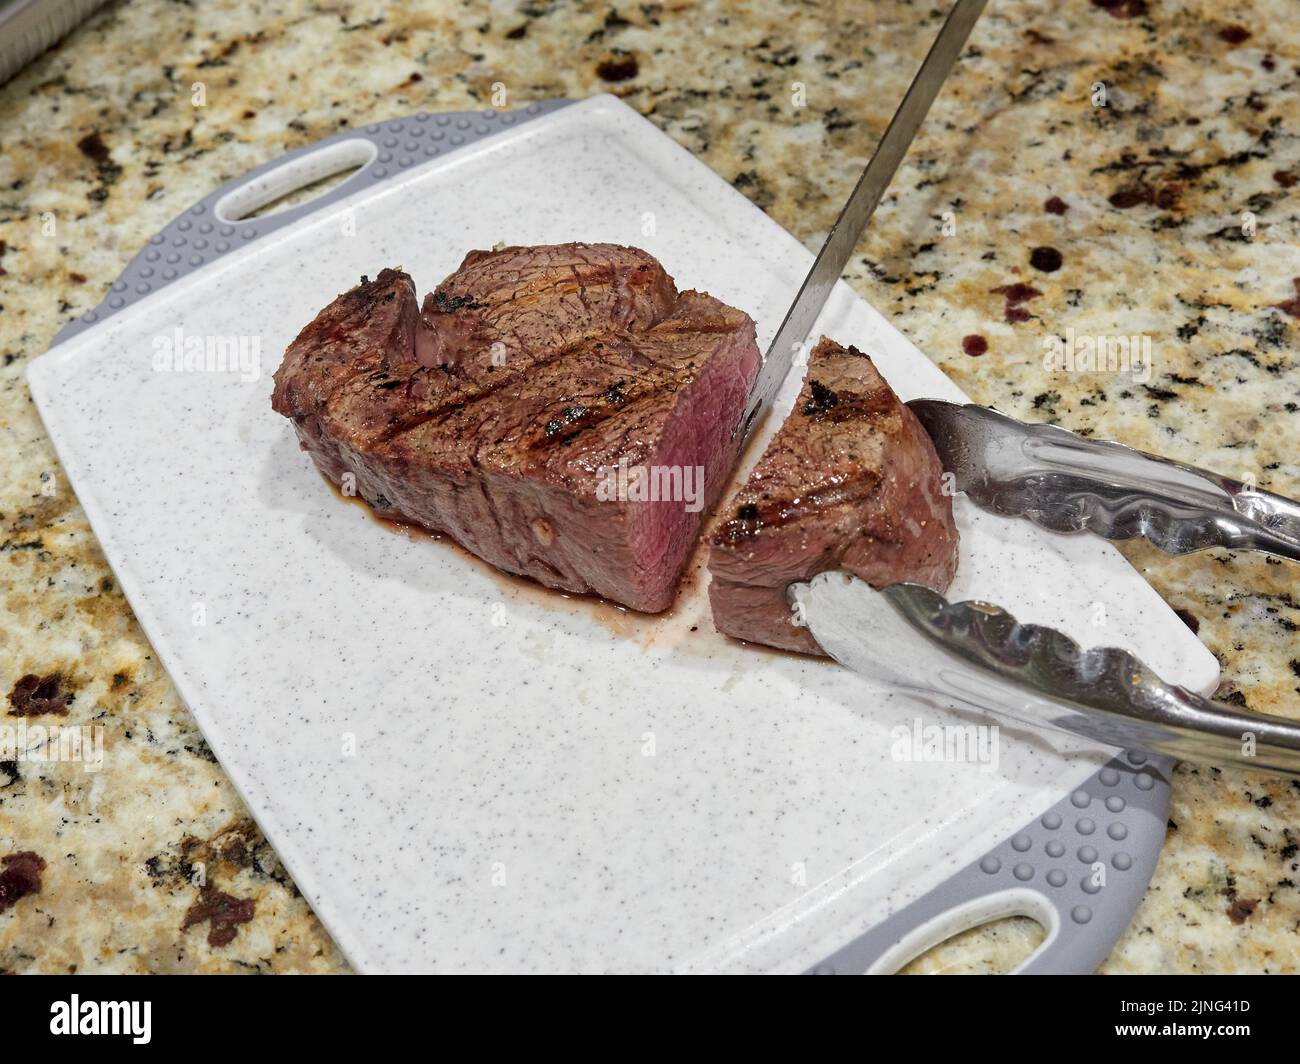 Grilled or cooked medium rare steak being cut on a cutting board for a dinner meal. Stock Photo